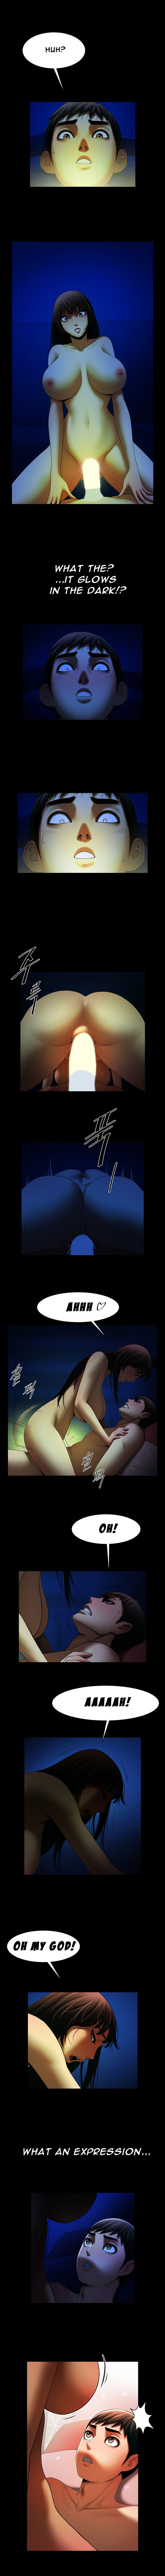 The Woman Who Lives In My Room - Chapter 21 Page 4